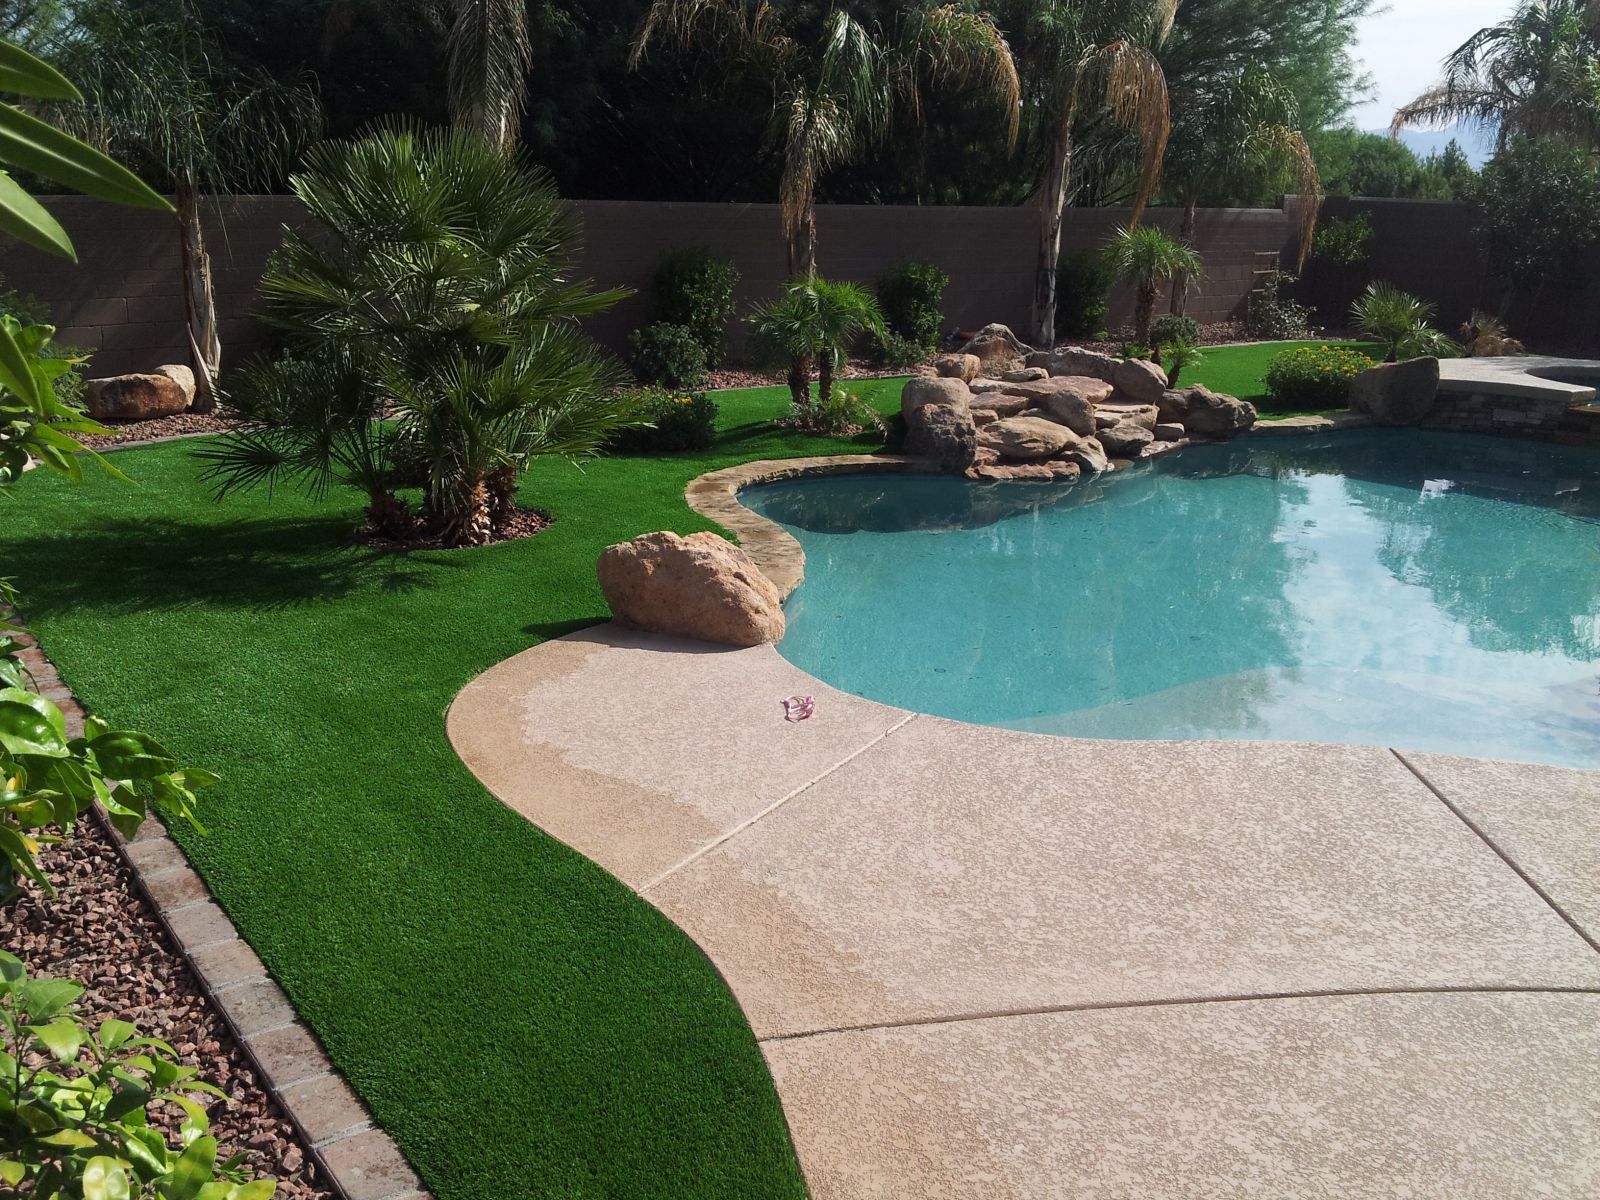 Scottsdale Artificial Grass. Keep Kids Safe With Fake Grass